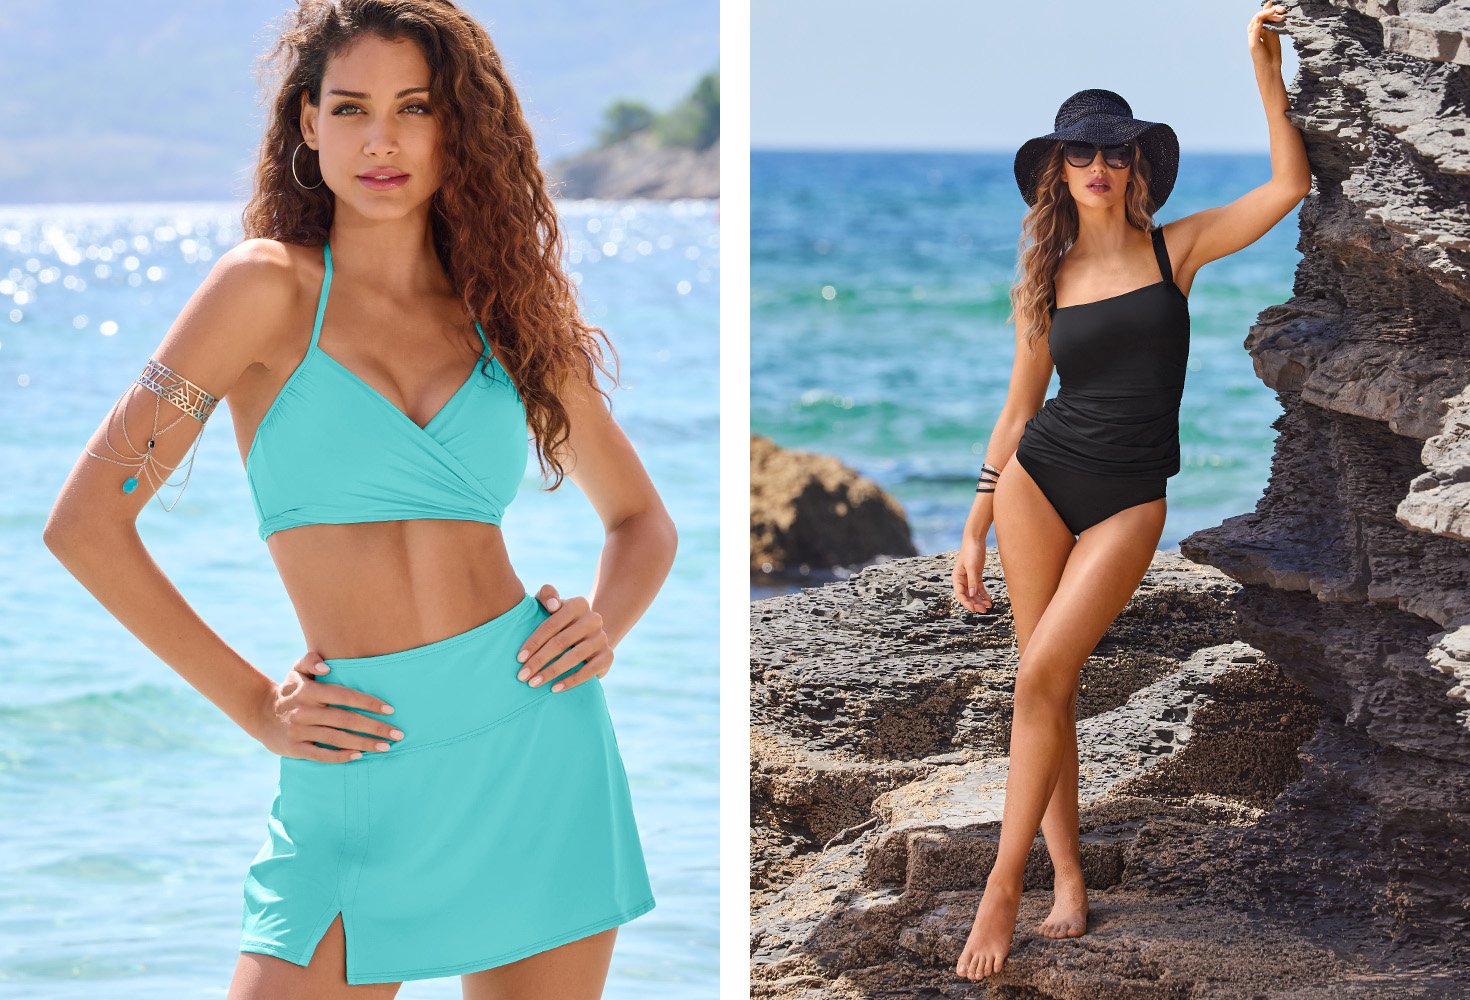 Left model wearing a light blue bikini top with skirted bottoms. Right model wearing a black tankini with high waisted bottoms, sunglasses, and a black straw hat.